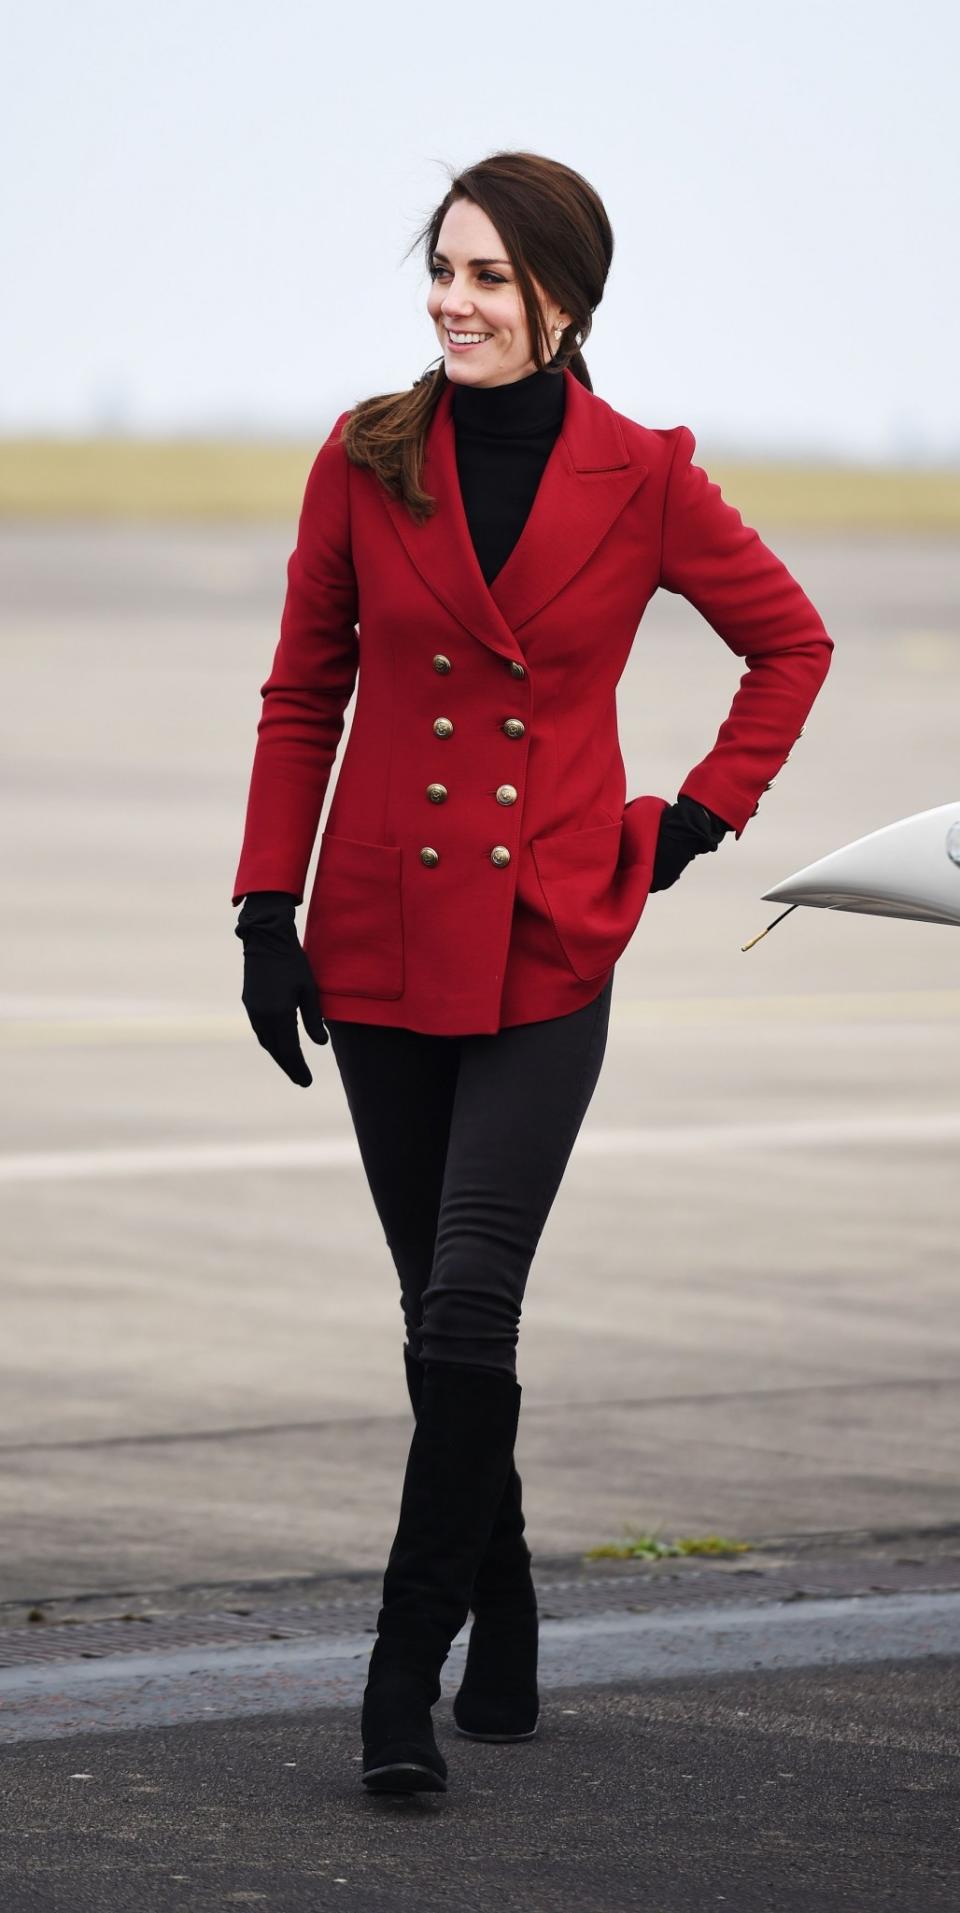 <p>The Duchess spent Valentine’s Day with young Air Cadets at an RAF base near Peterborough. She suitably wore a military-inspired look featuring a double-breasted red jacket by Philosophy di Lorenzo Serafini and her favourite suede Stuart Weitzman boots.<br><i>[Photo: PA]</i> </p>